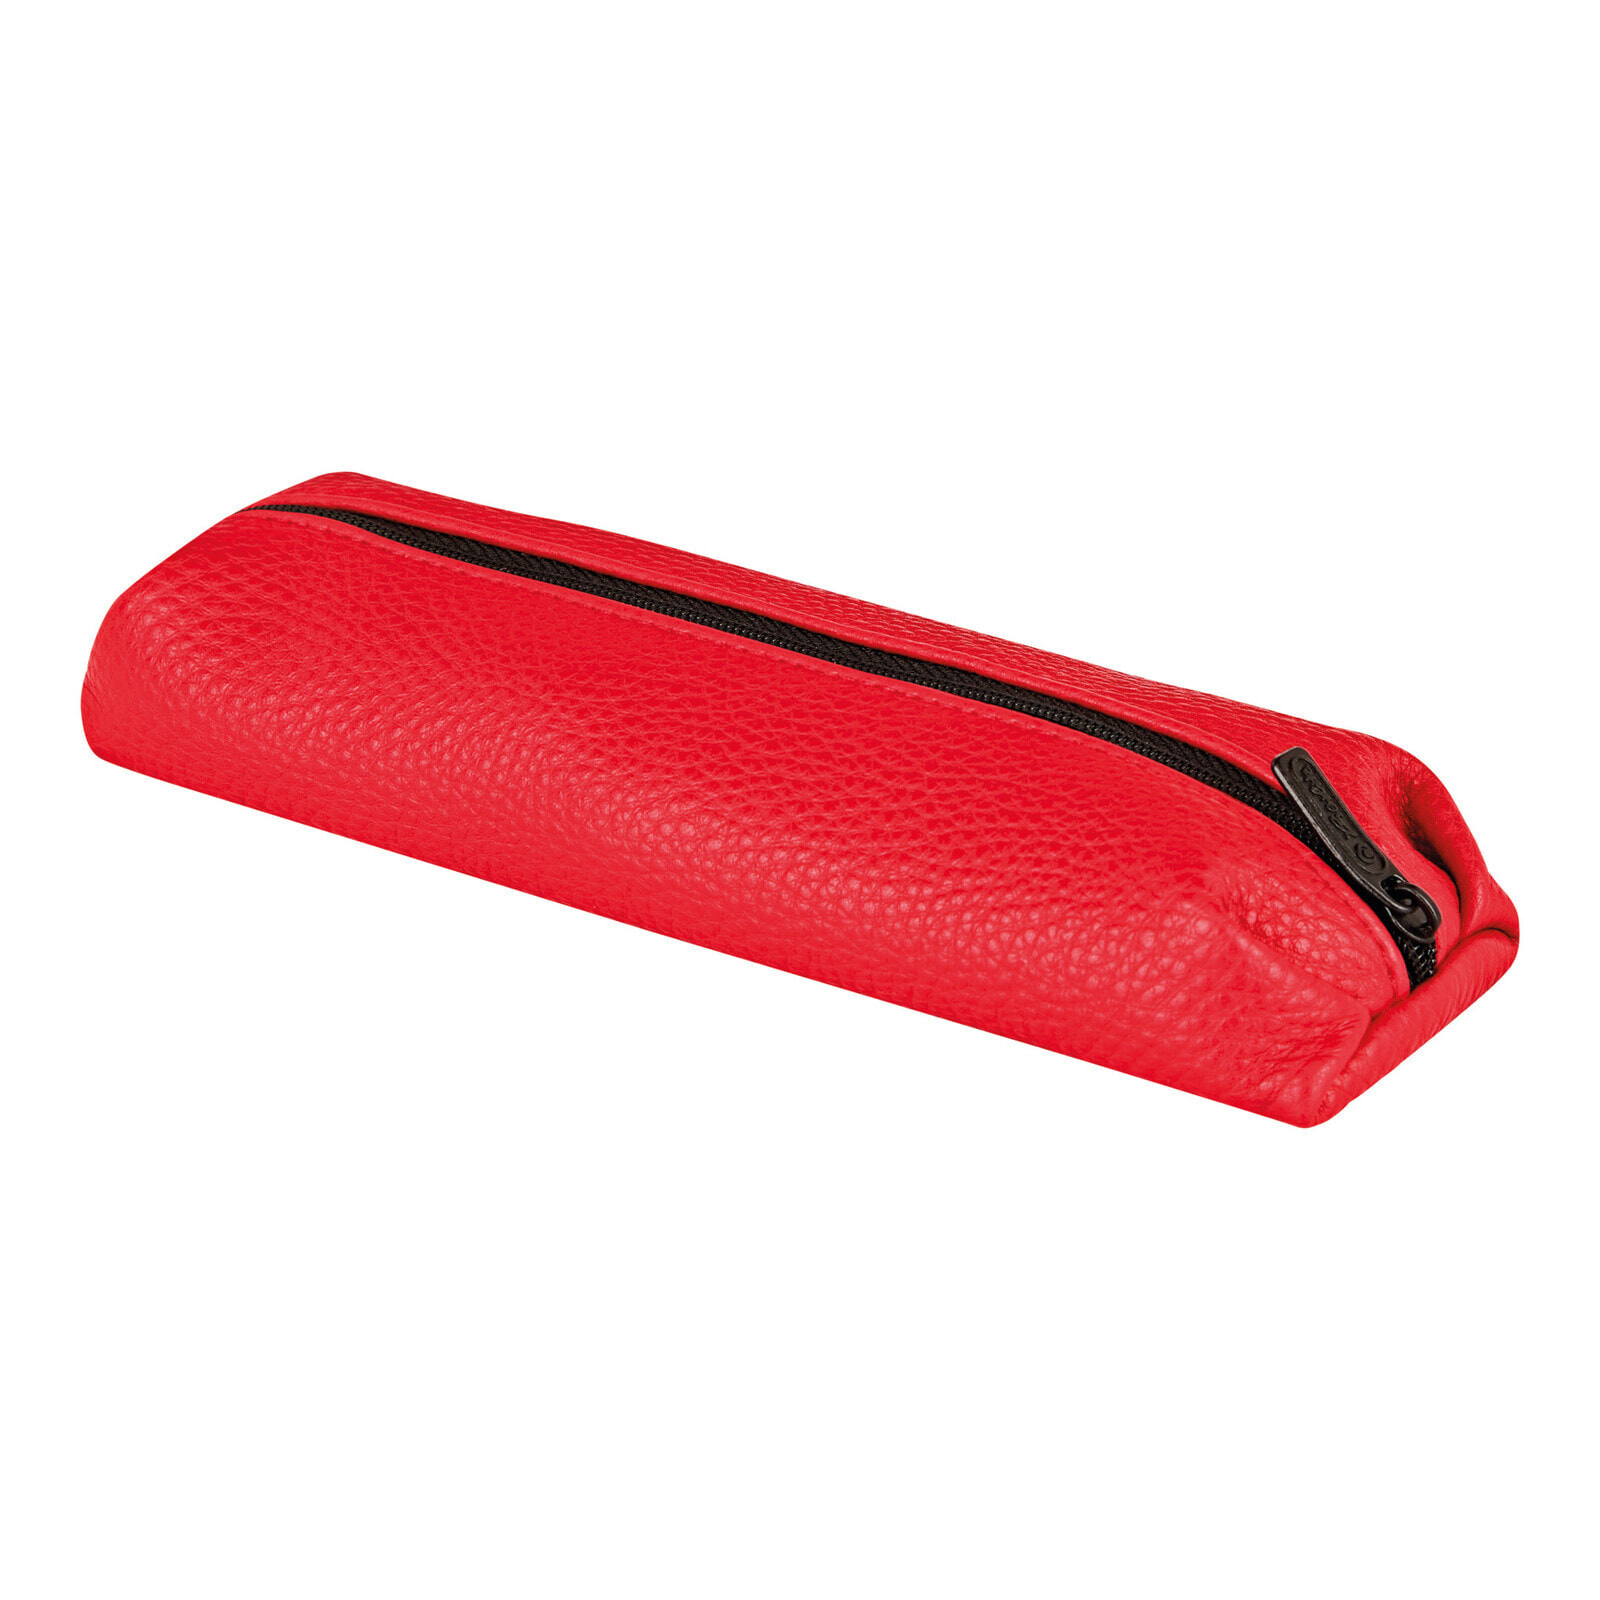 50043835 - Various Office Accessory - Red